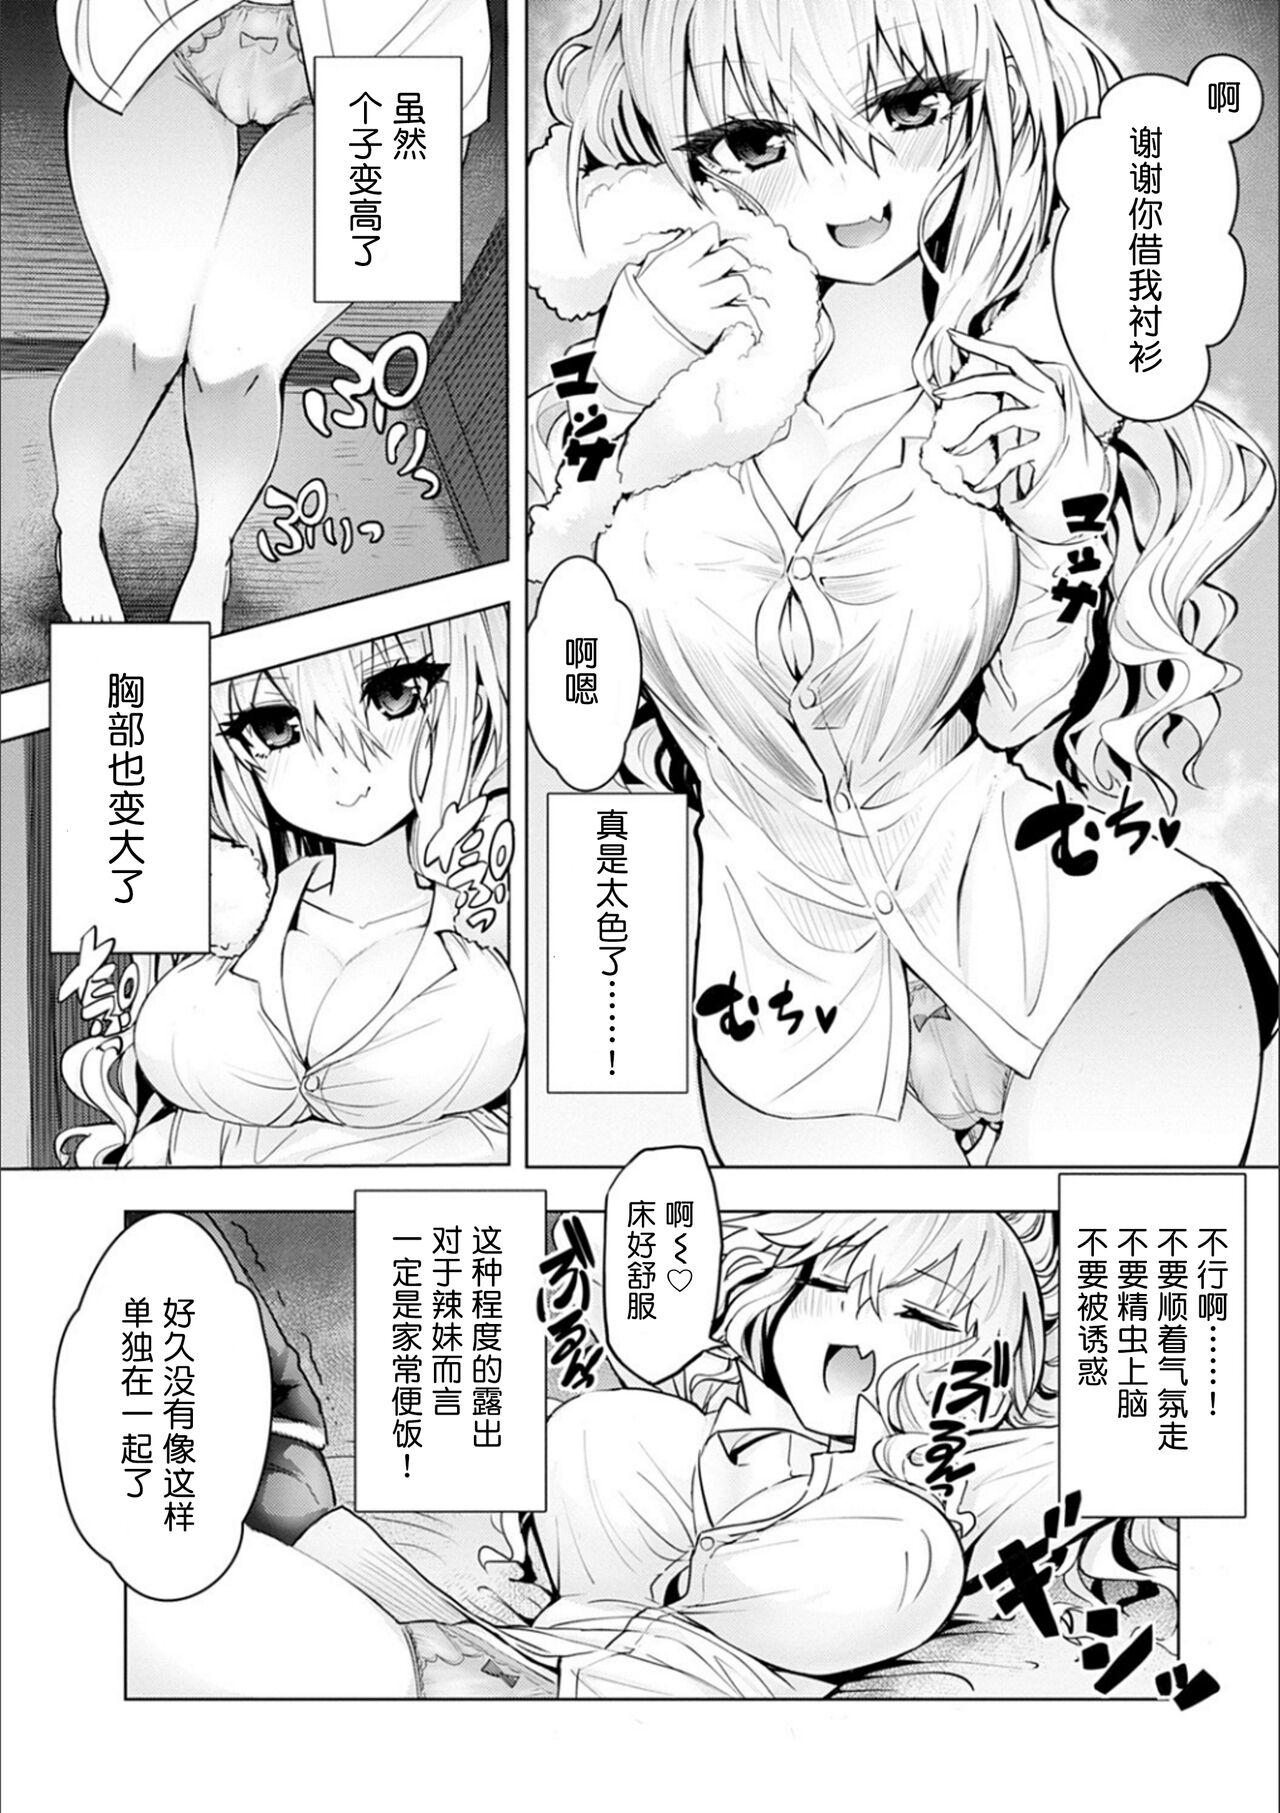 Old Vs Young Gal x Geek! | 辣妹x宅男 Couple Porn - Page 8